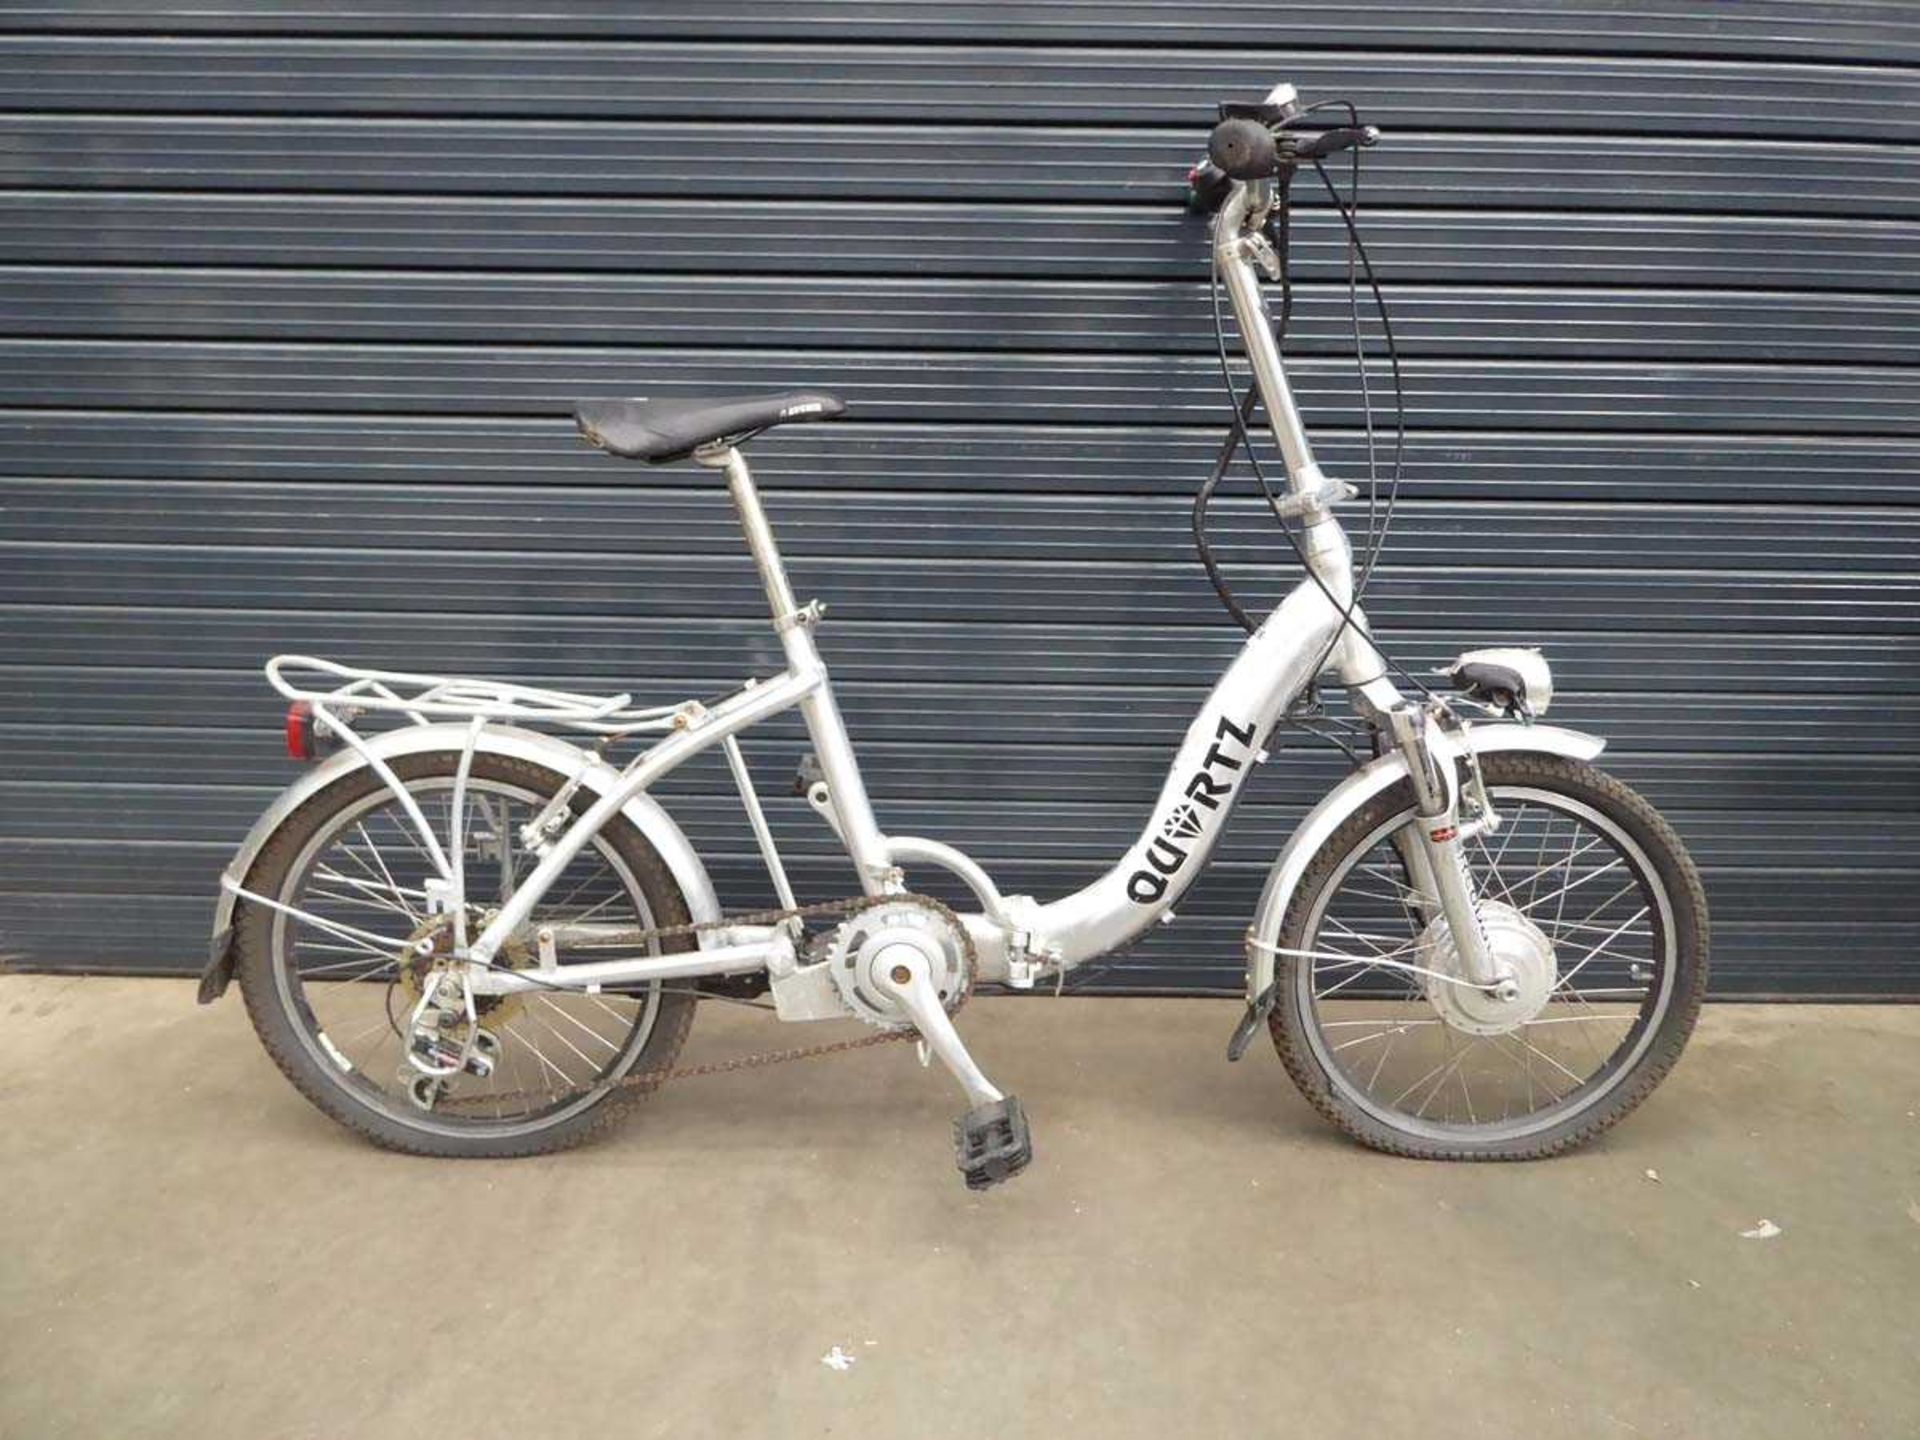 Foldup silver battery powered bike, no battery or charger